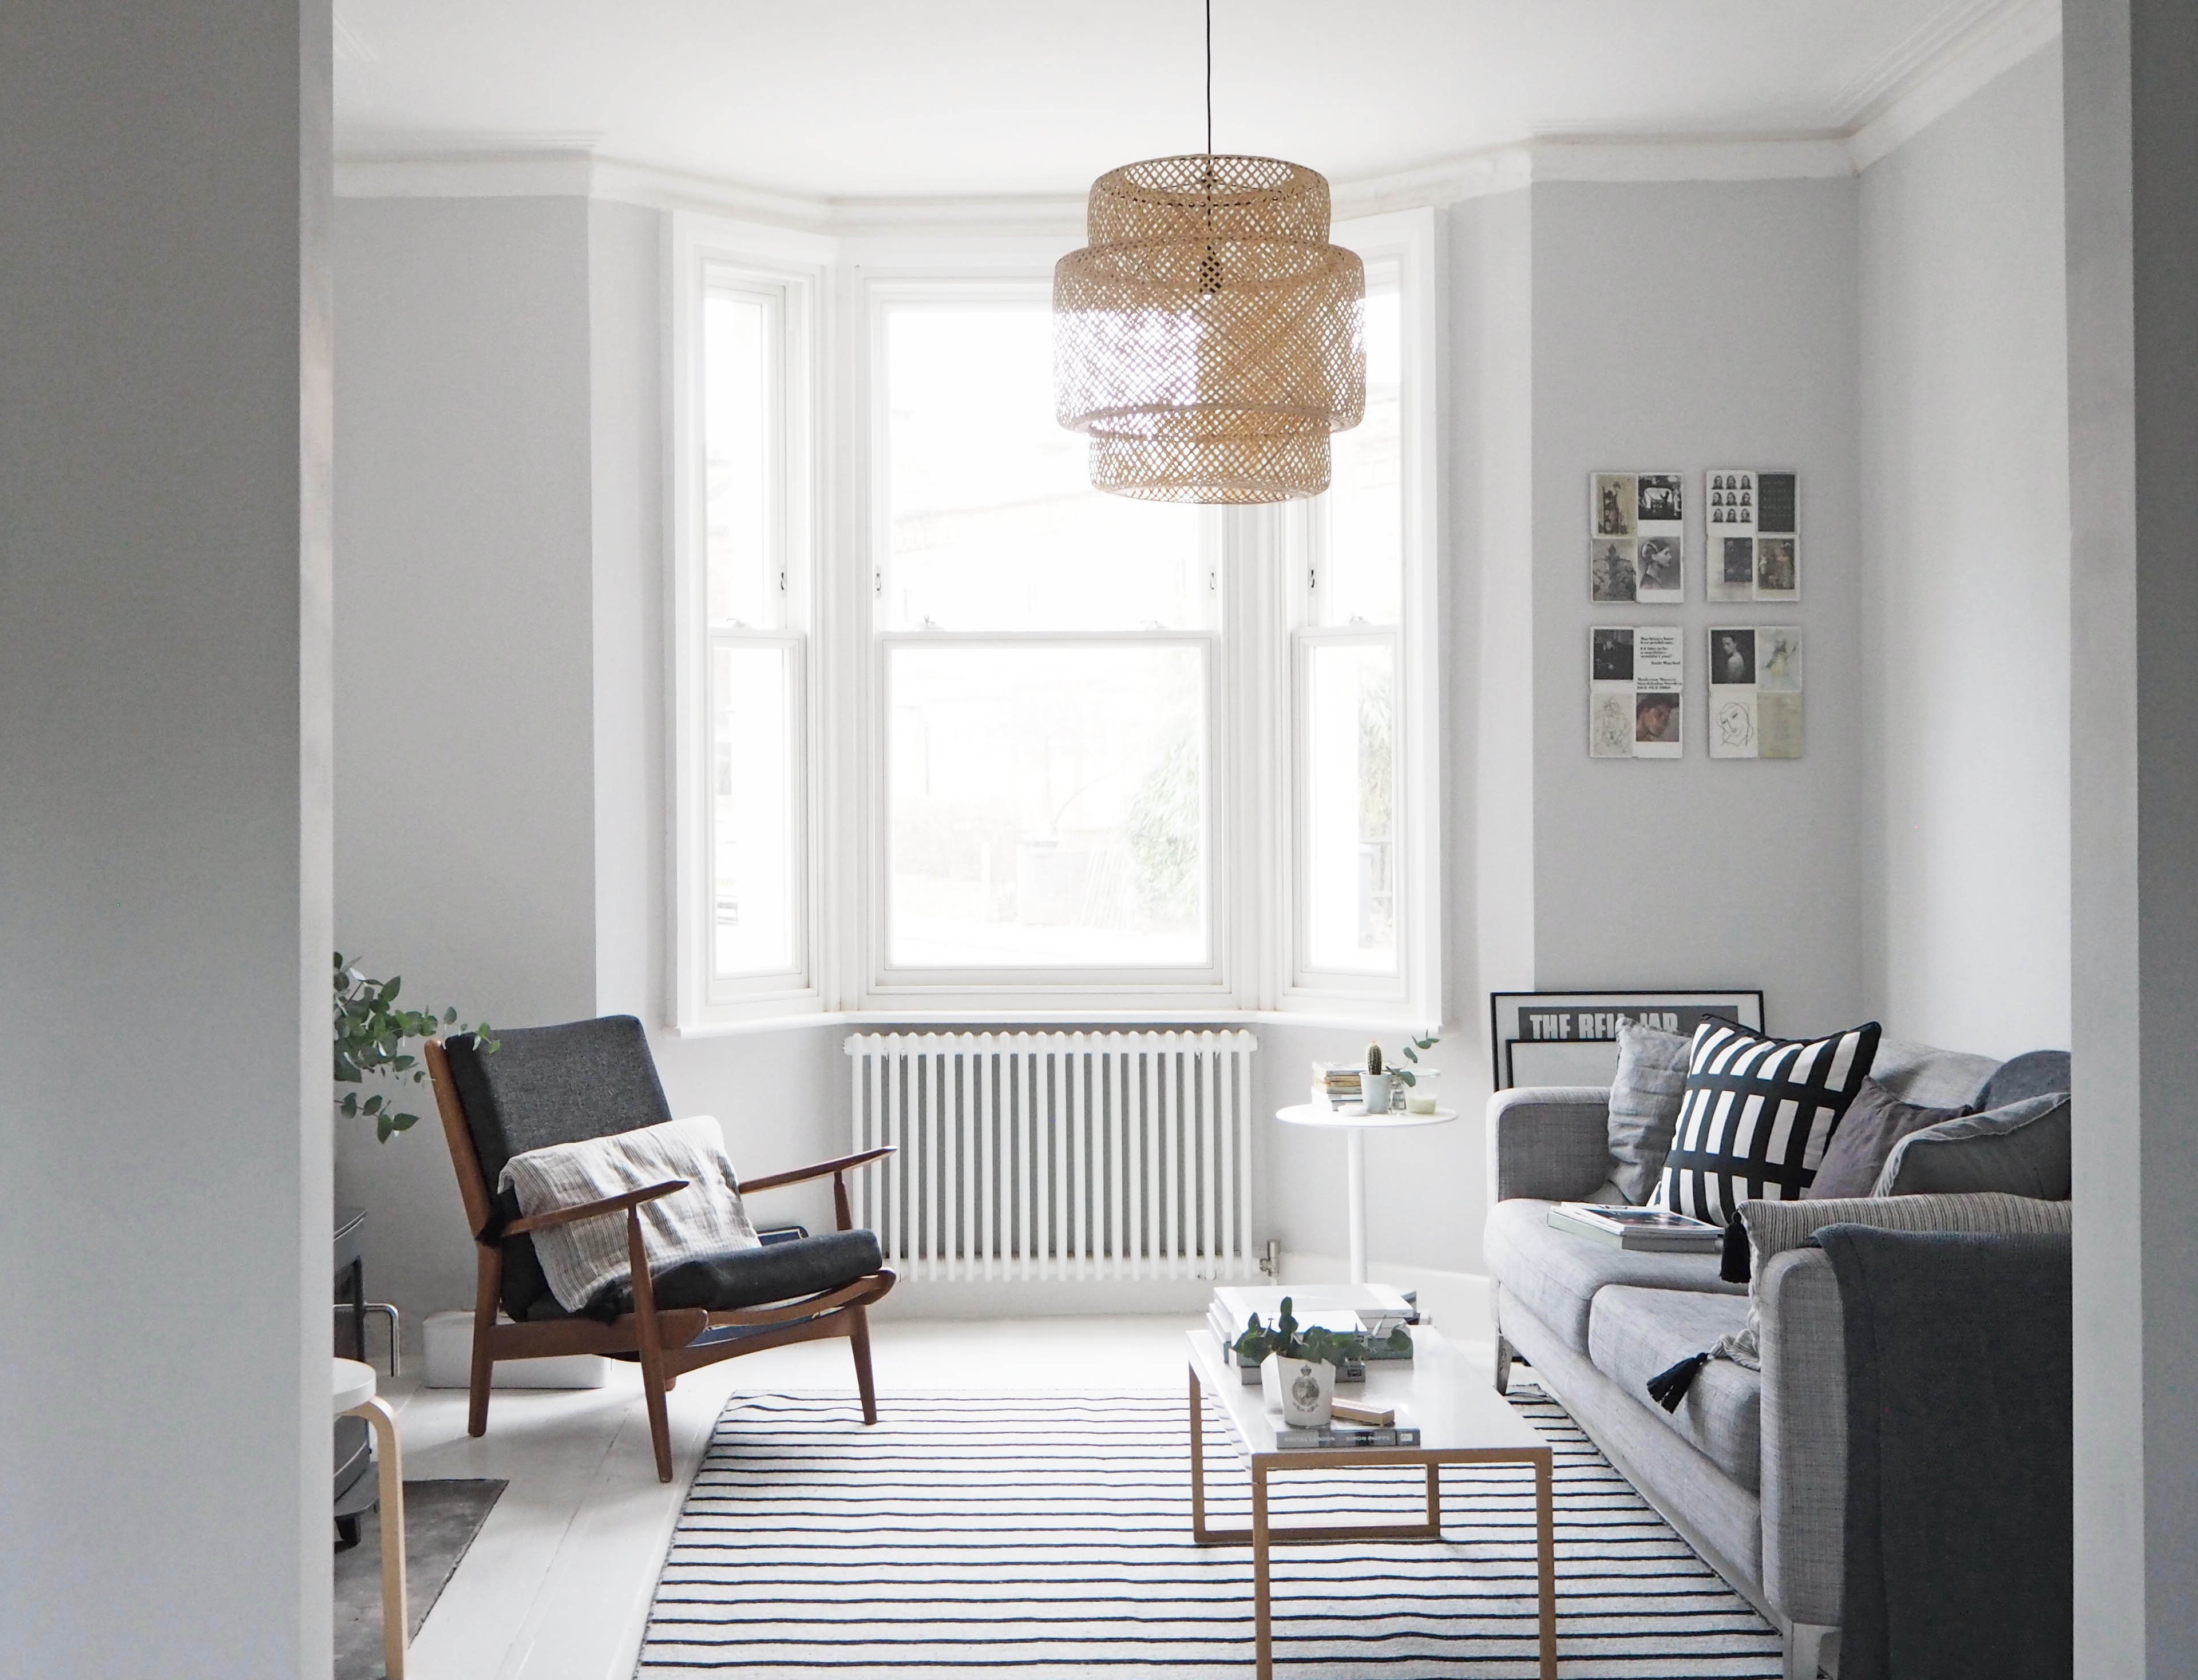 My Scandi-style living room makeover – painted white floors and light